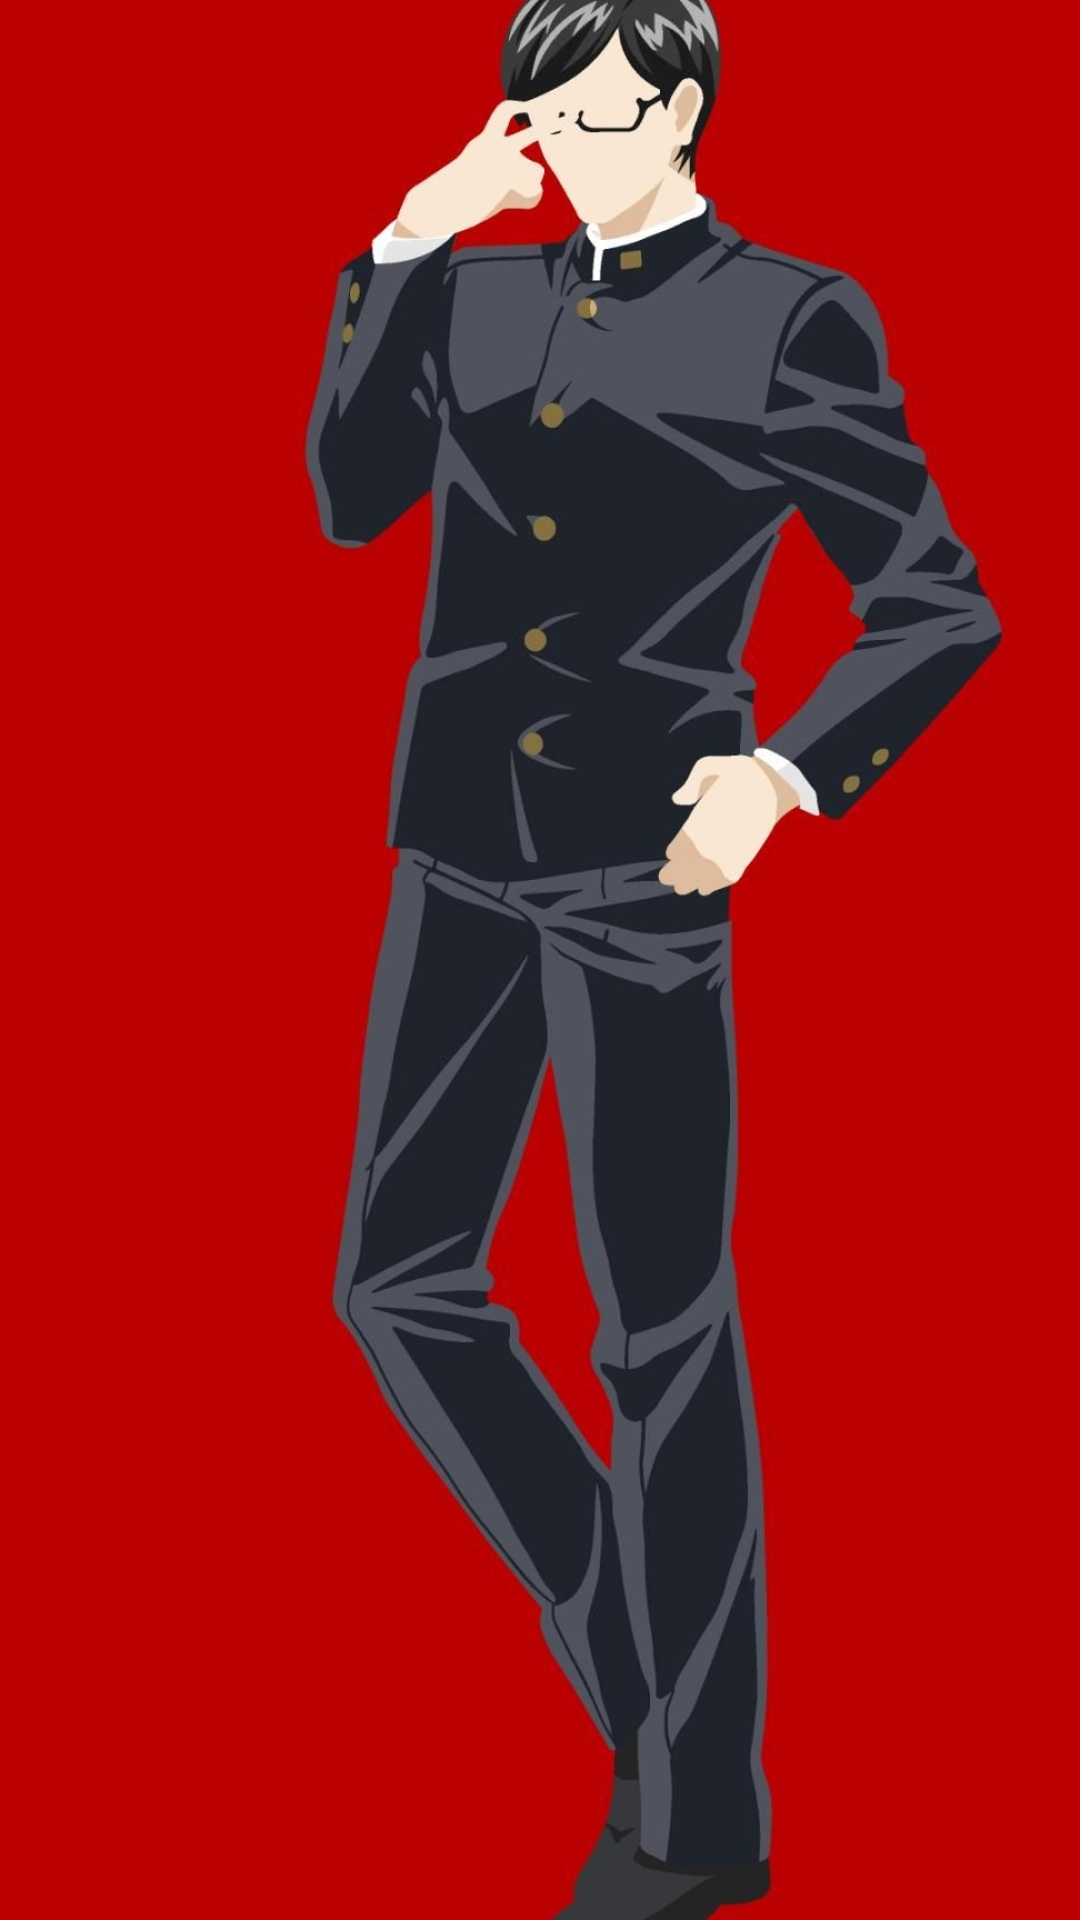 Sakamoto wallpapers, Top free backgrounds, Anime series, Cool protagonist, 1080x1920 Full HD Handy